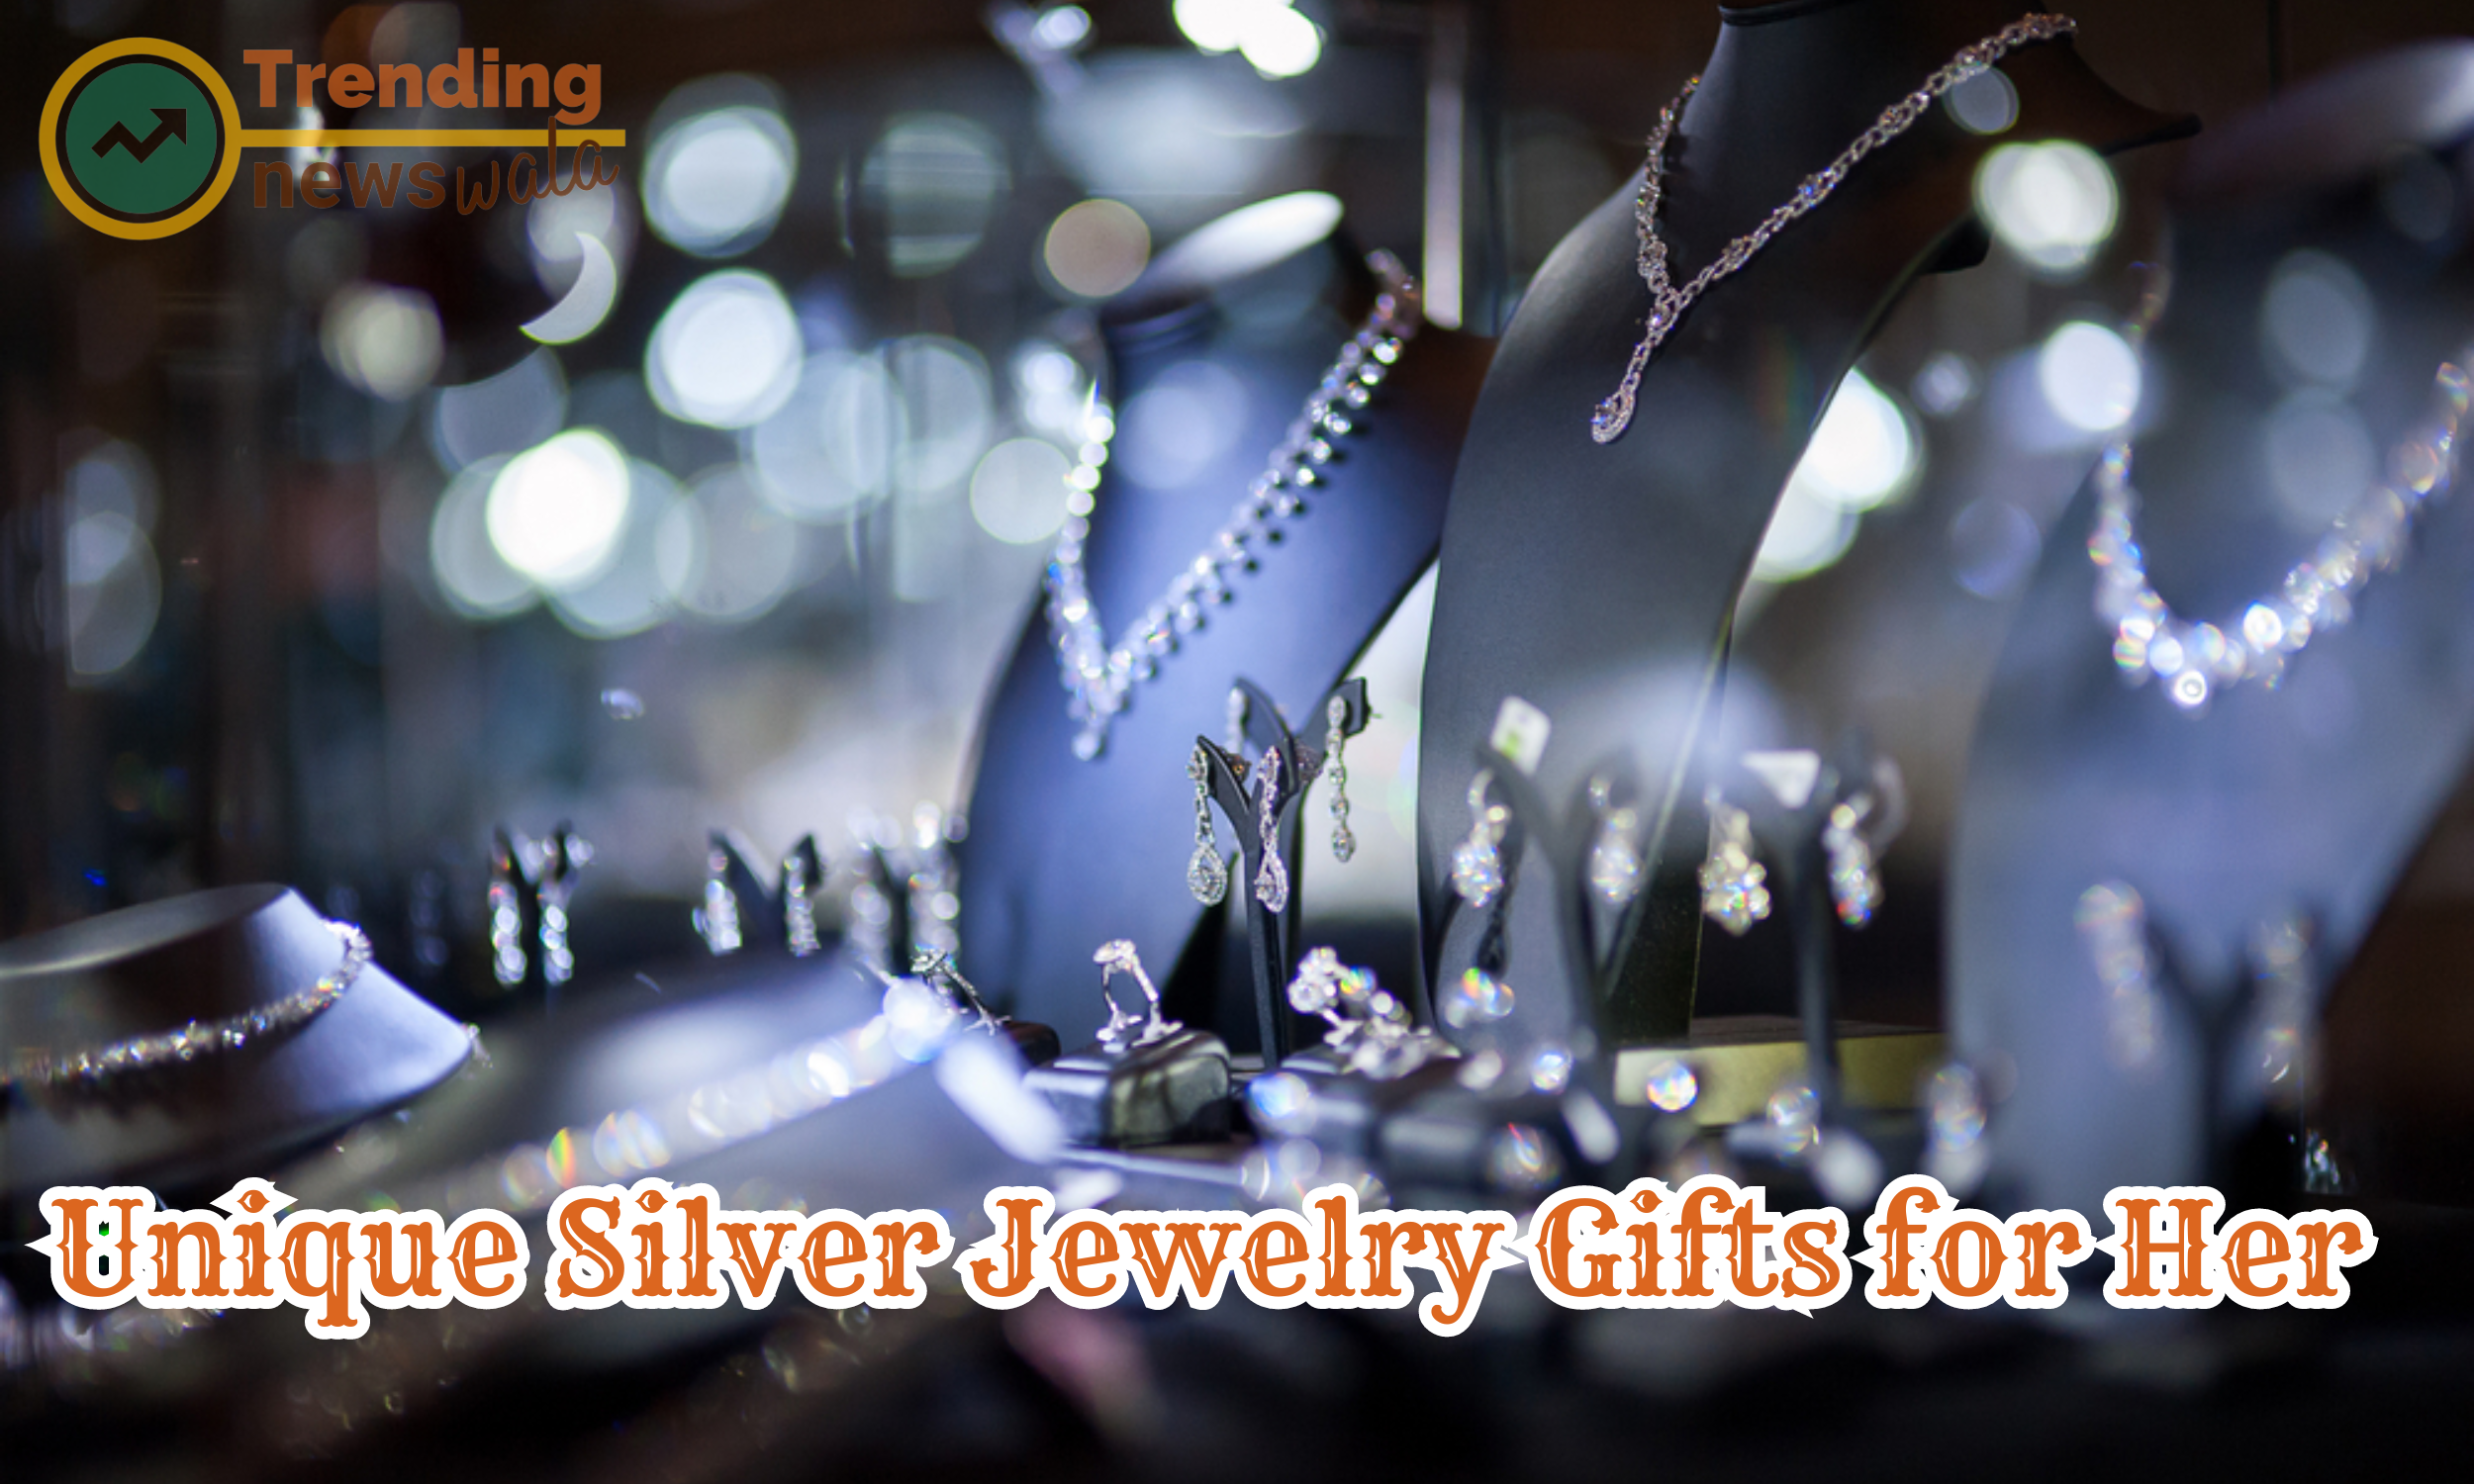 Unique silver jewelry gifts for her offer a wide array of options